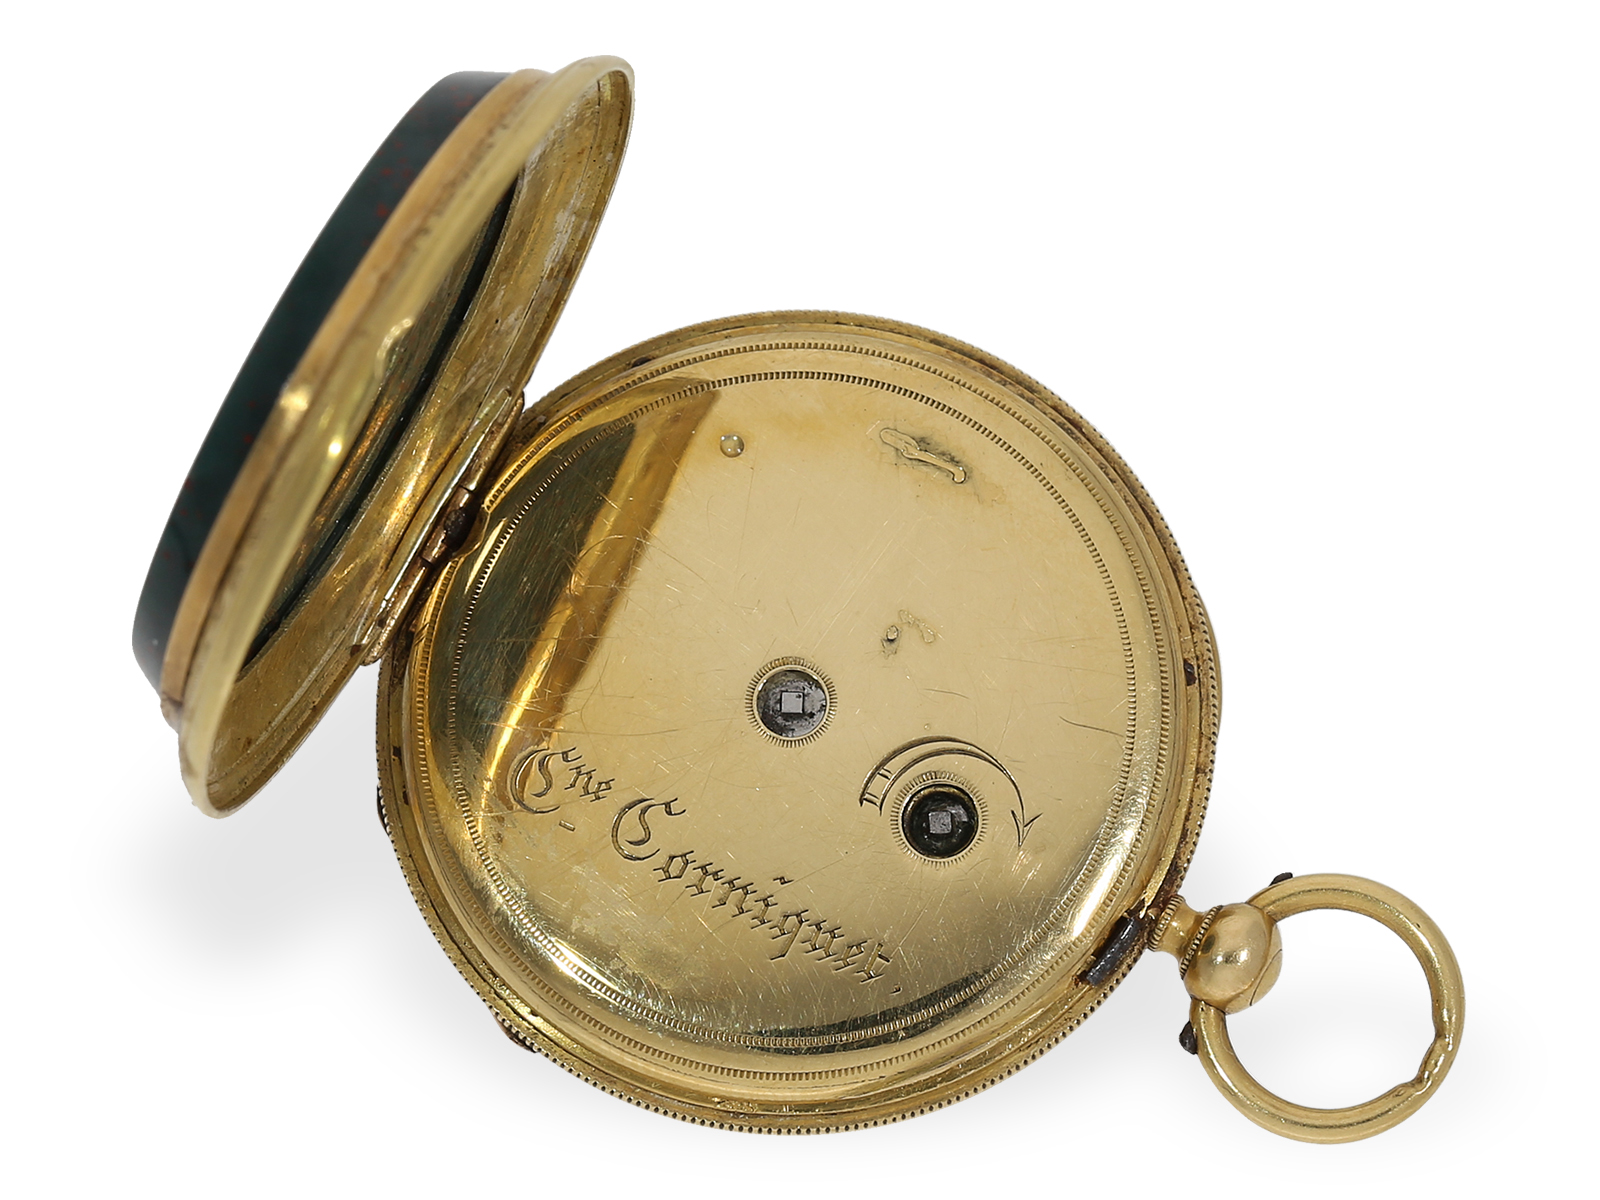 Pocket watch: rare lepine with gold/jasper case and gold/jasper chatelaine, ca. 1850 - Image 6 of 8